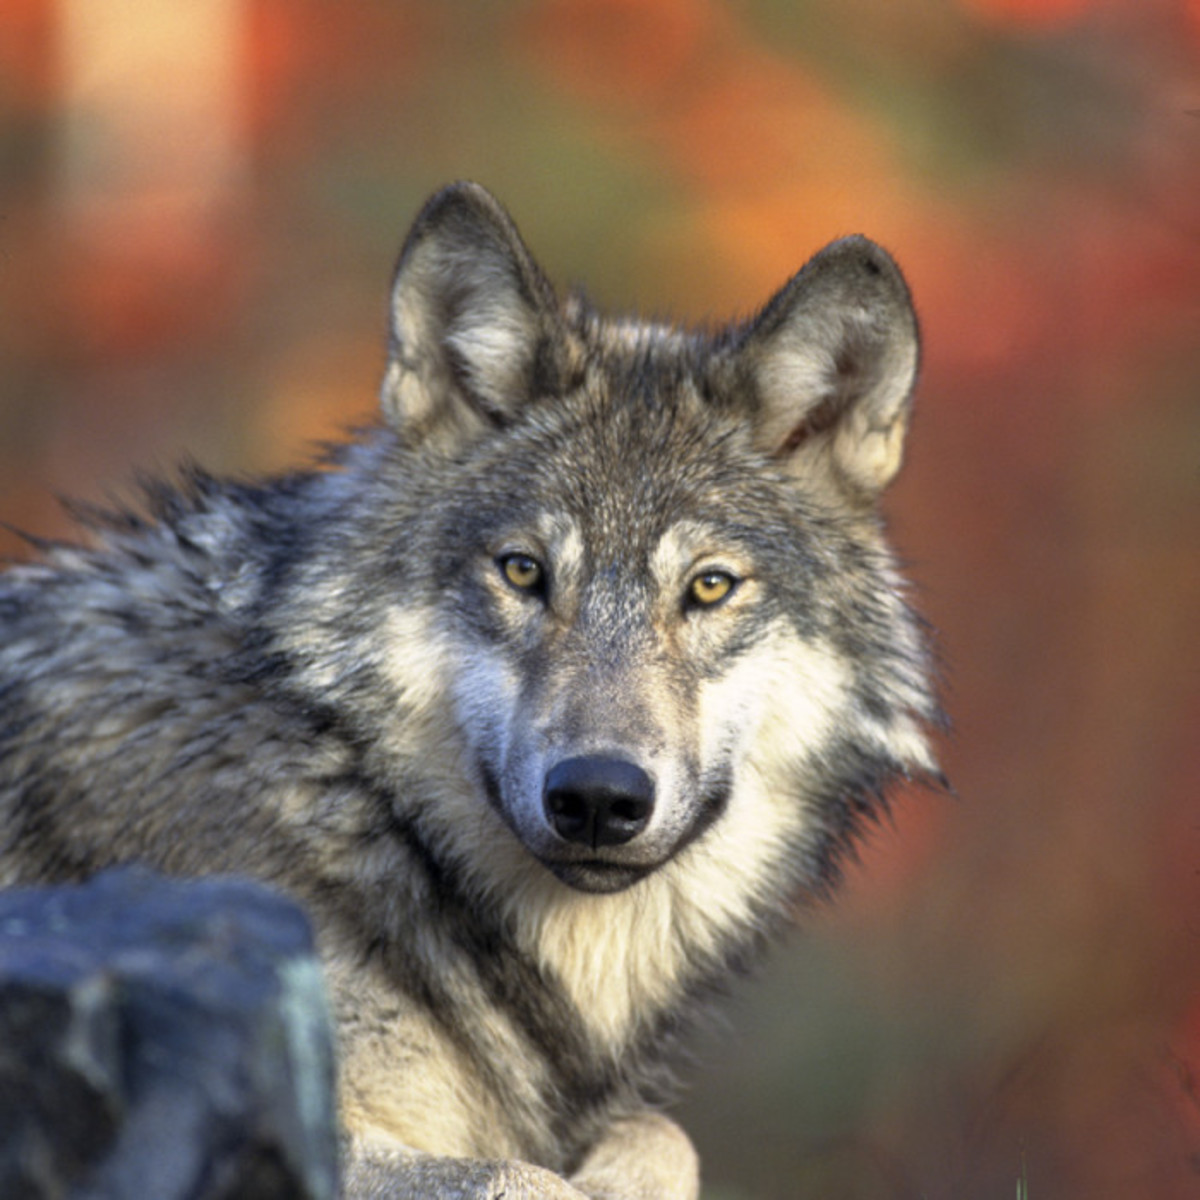 The gray wolf, a beautiful animal and creature.